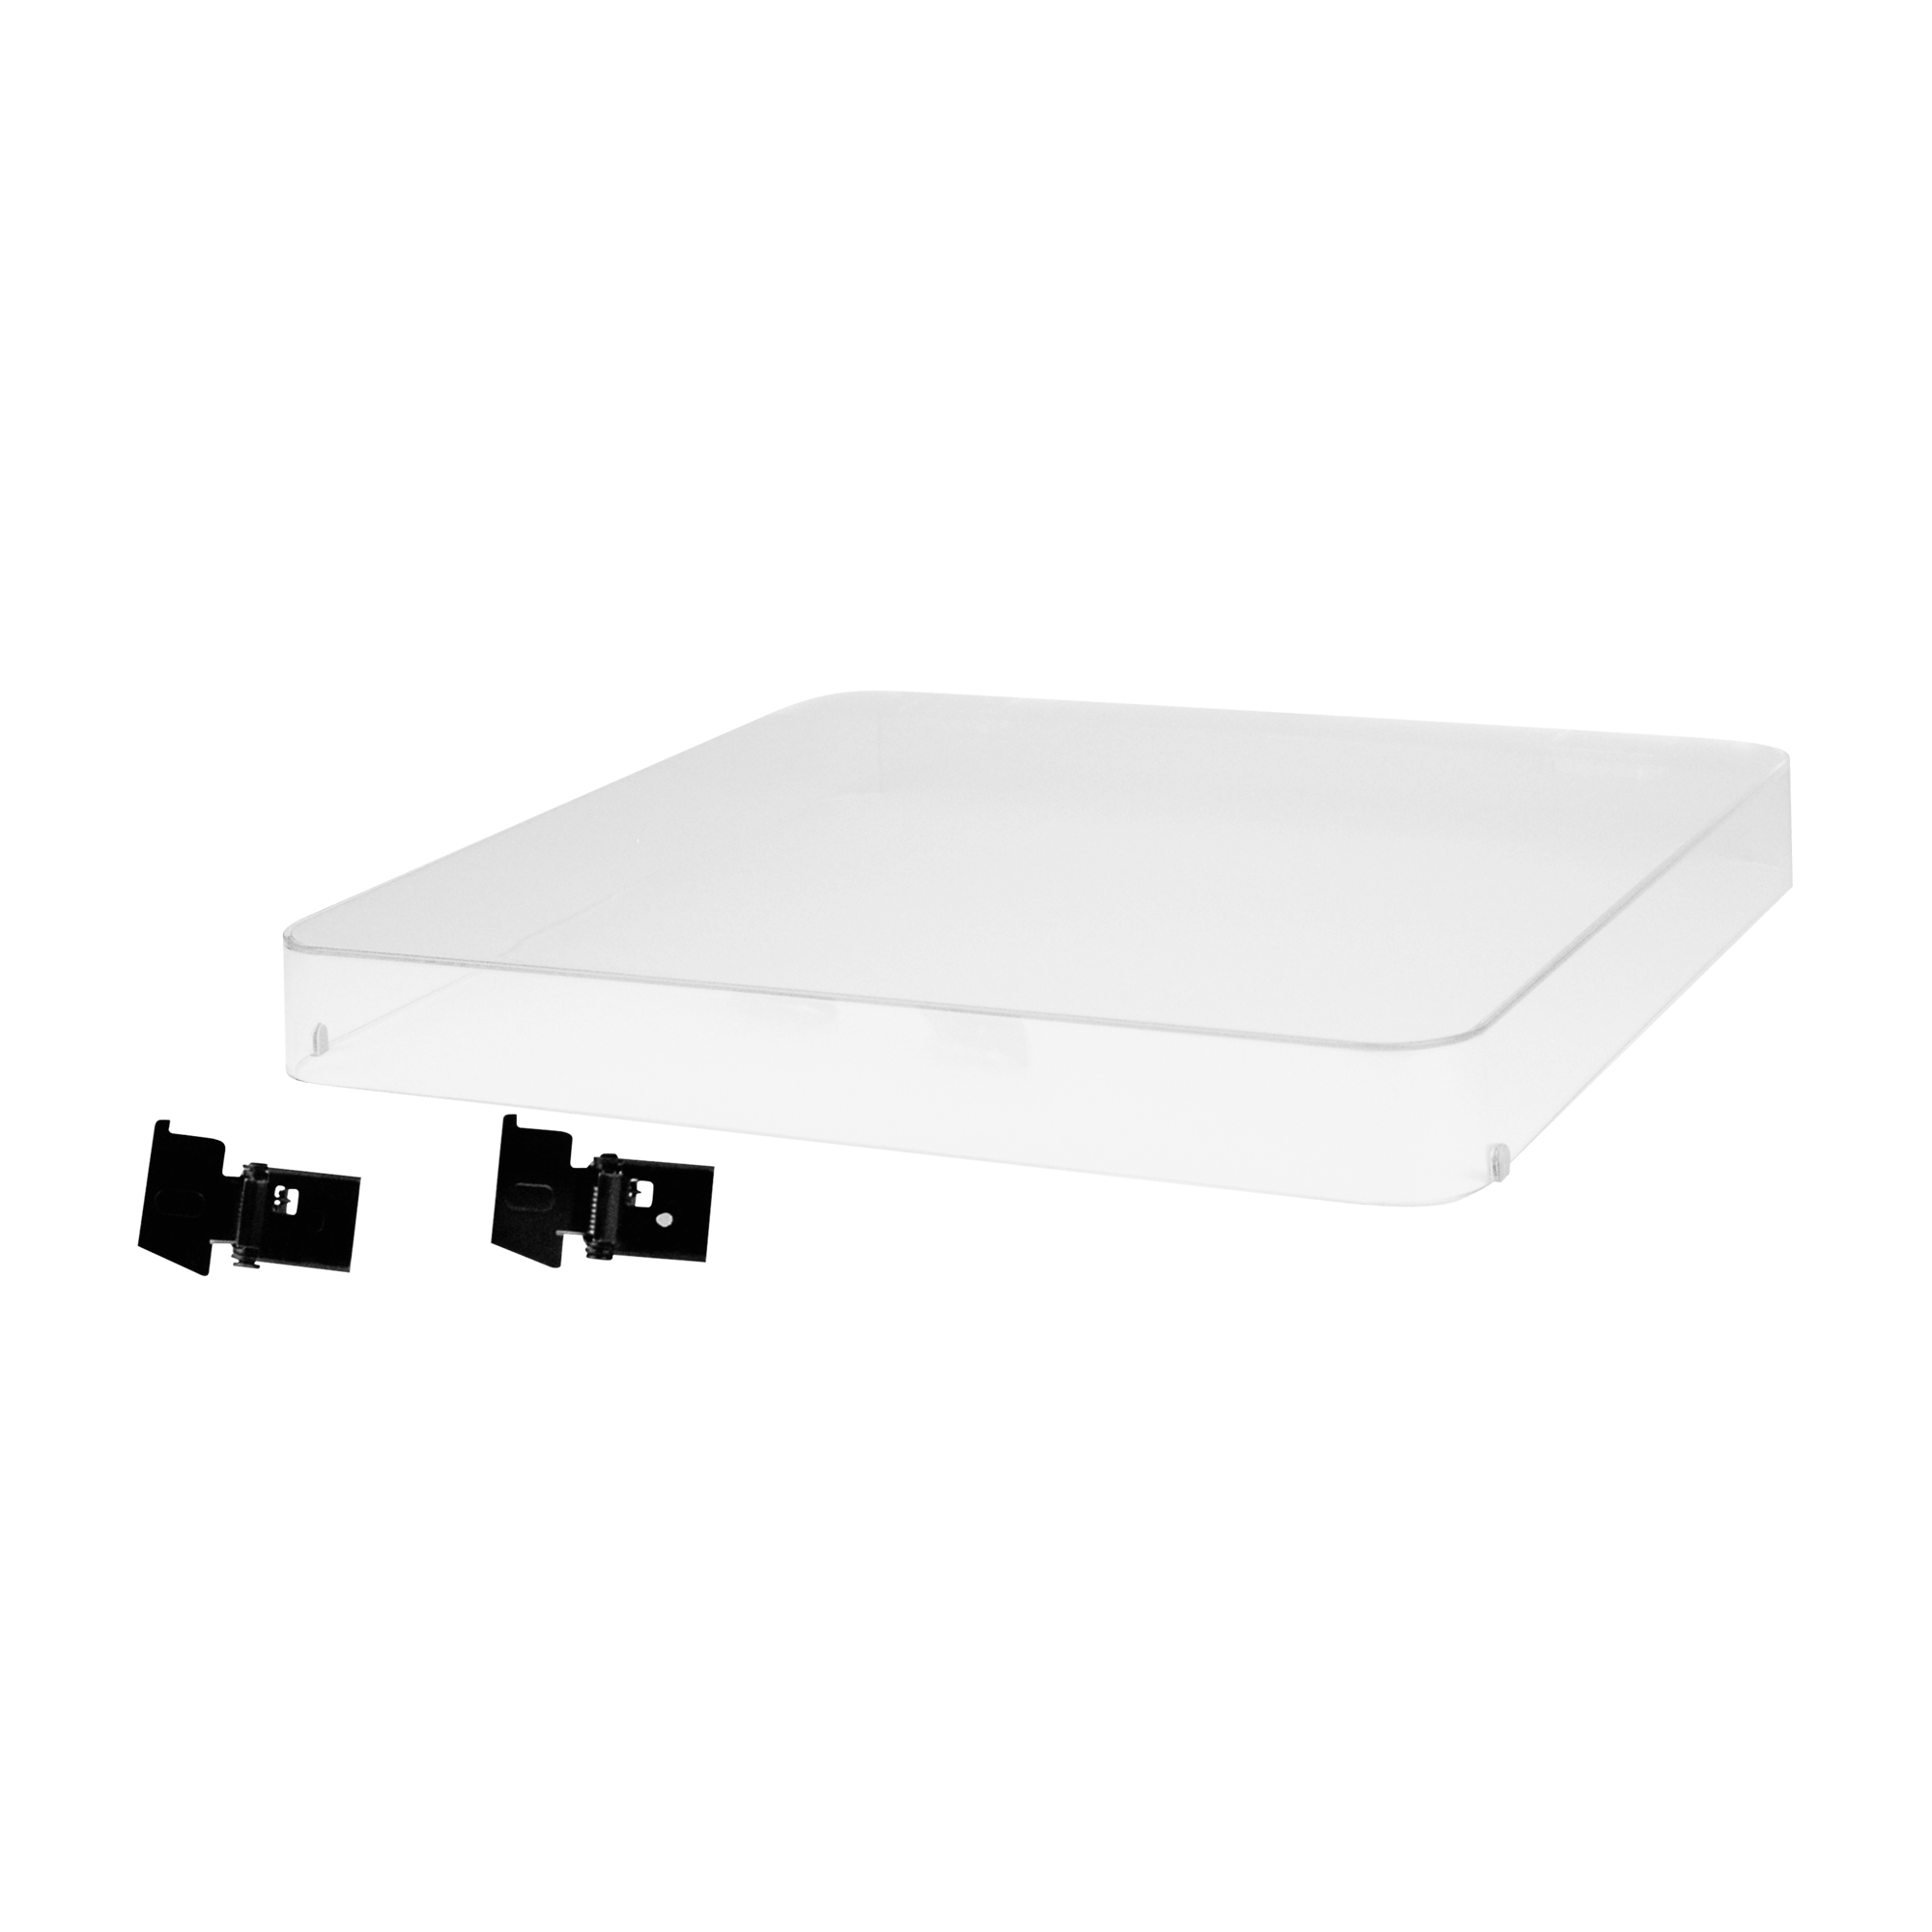  OEM Dust Cover for AT-LP60/USB/AT-PL50 Turntables : Electronics